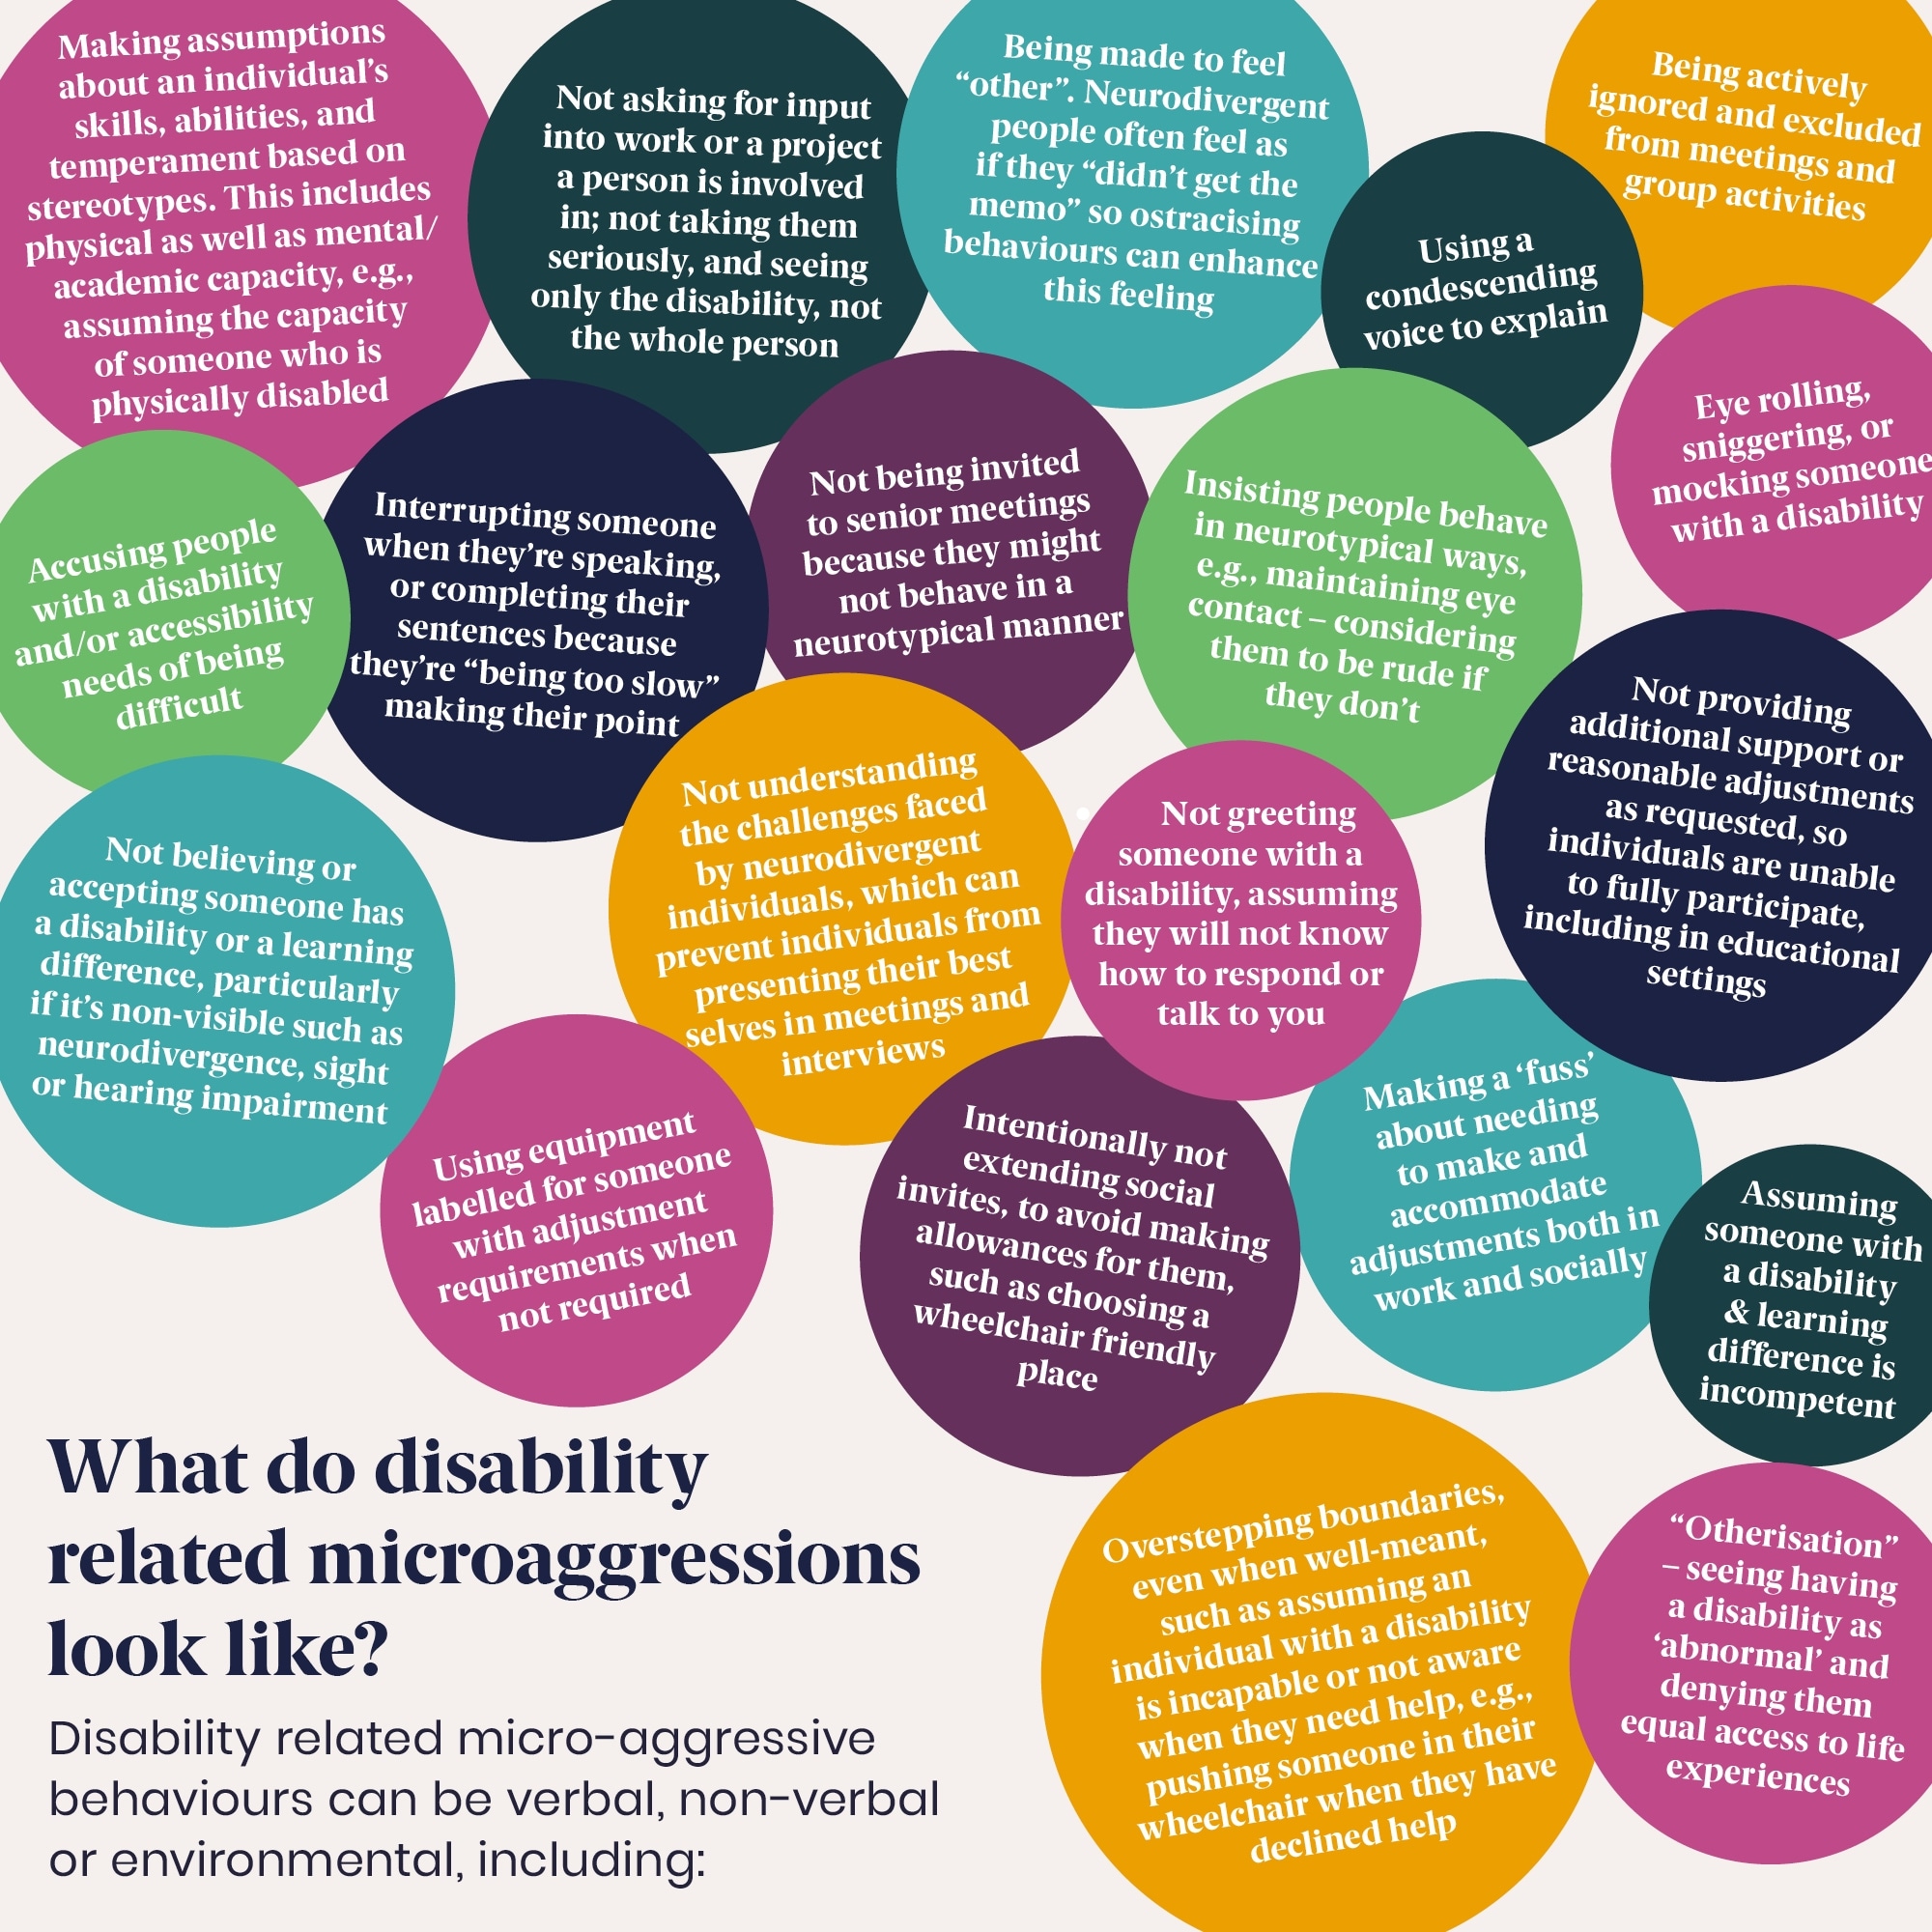 Disability Microaggressions include Making assumptions about an individual’s skills, abilities, and temperament based on stereotypes. This includes physical as well as mental/academic capacity, e.g. assuming the capacity of someone who is physically disabled, Not asking for input into work or a project a person is involved in, not taking them seriously, and seeing only the disability not the whole person, Being made to feel other, Neurodivergent people often feel as if they didn’t get the memo so ostracising behaviours can enhance this feeling, using a condescending voice to explain, Being actively ignored and excluded from meeting and group activities, Accusing people with a disability or accessibility needs of being difficult, Interrupting someone when they’re speaking, or completing their sentences because they’re being too slow making their point, Not being invited to senior meetings because they might not behave in a neurotypical manner, Insisting people behave in neurotypical ways, Eye rolling, sniggering, mocking someone with a disability, No believing or accepting someone has a disability of learning difference, particularly if it non-visible such as neurodivergence, Using equipment labelled for someone with adjustment requirements when not required, Not understanding the challenges faced buy neurodivergent individuals, Not greeting someone with a disability, assuming they will not know how to respond or talk to you, Intentionally not extending social invites, Making a fun about needing to make and accommodate adjustments, Not providing additional support or reasonable adjustments as requested, Assigning someone with a disability is incompetent, Overstepping boundaries, Otherisation.